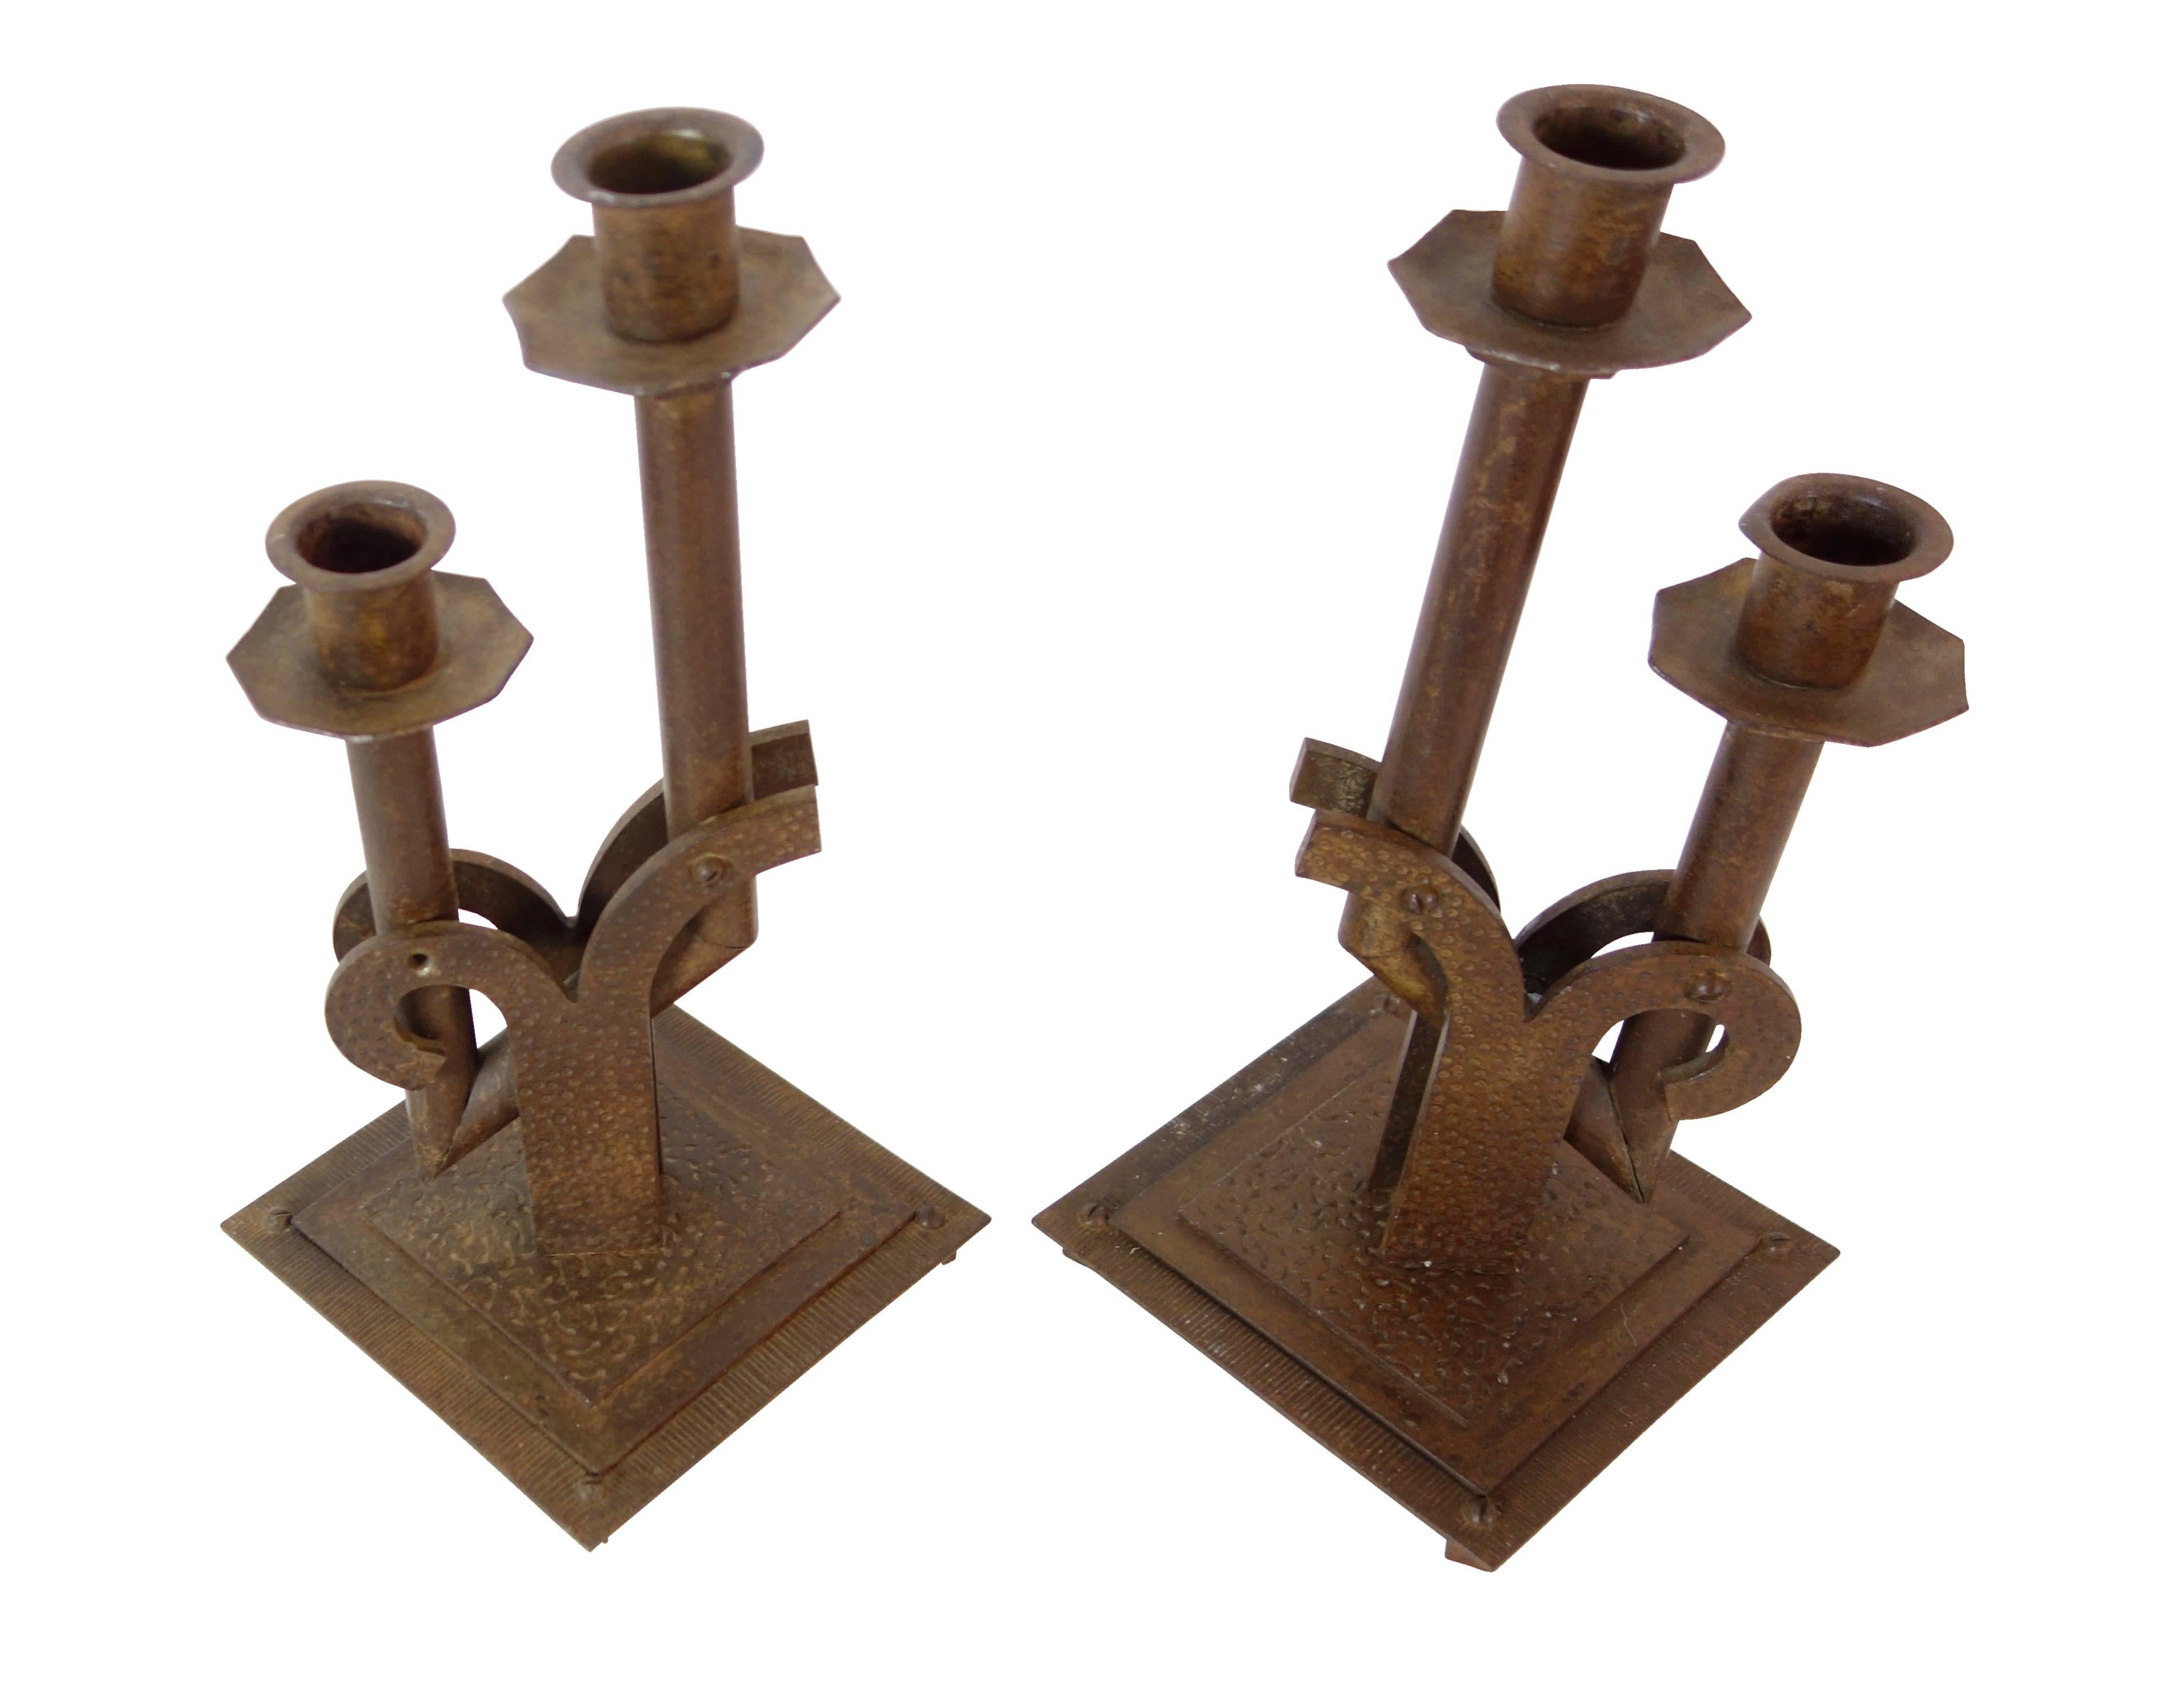 This is a wonderful pair of steel Bauhaus style candlesticks from France, circa 1920.